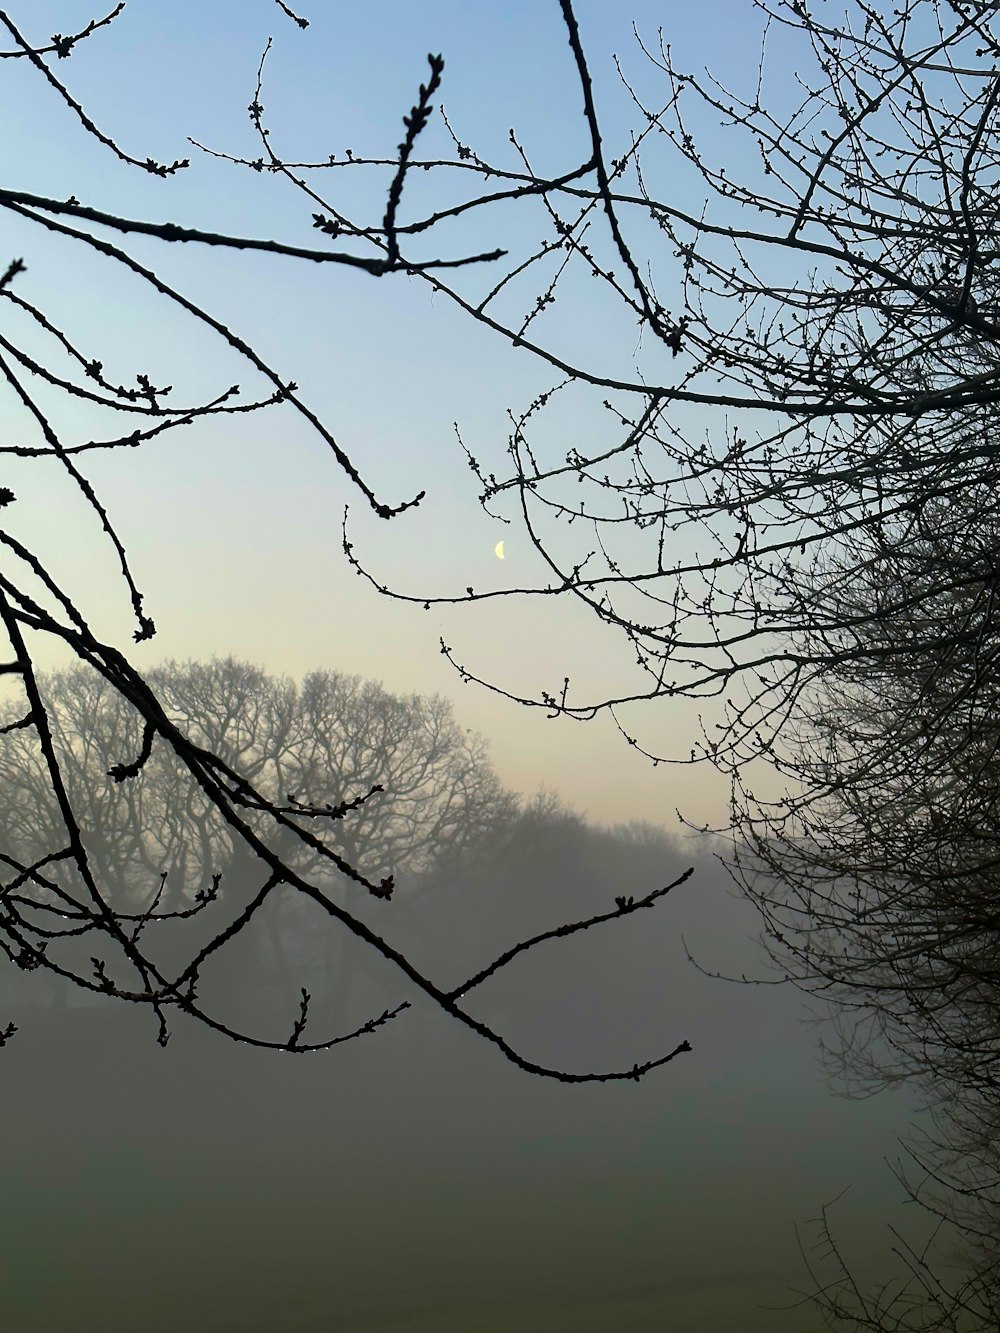 a tree branch with no leaves in a foggy field